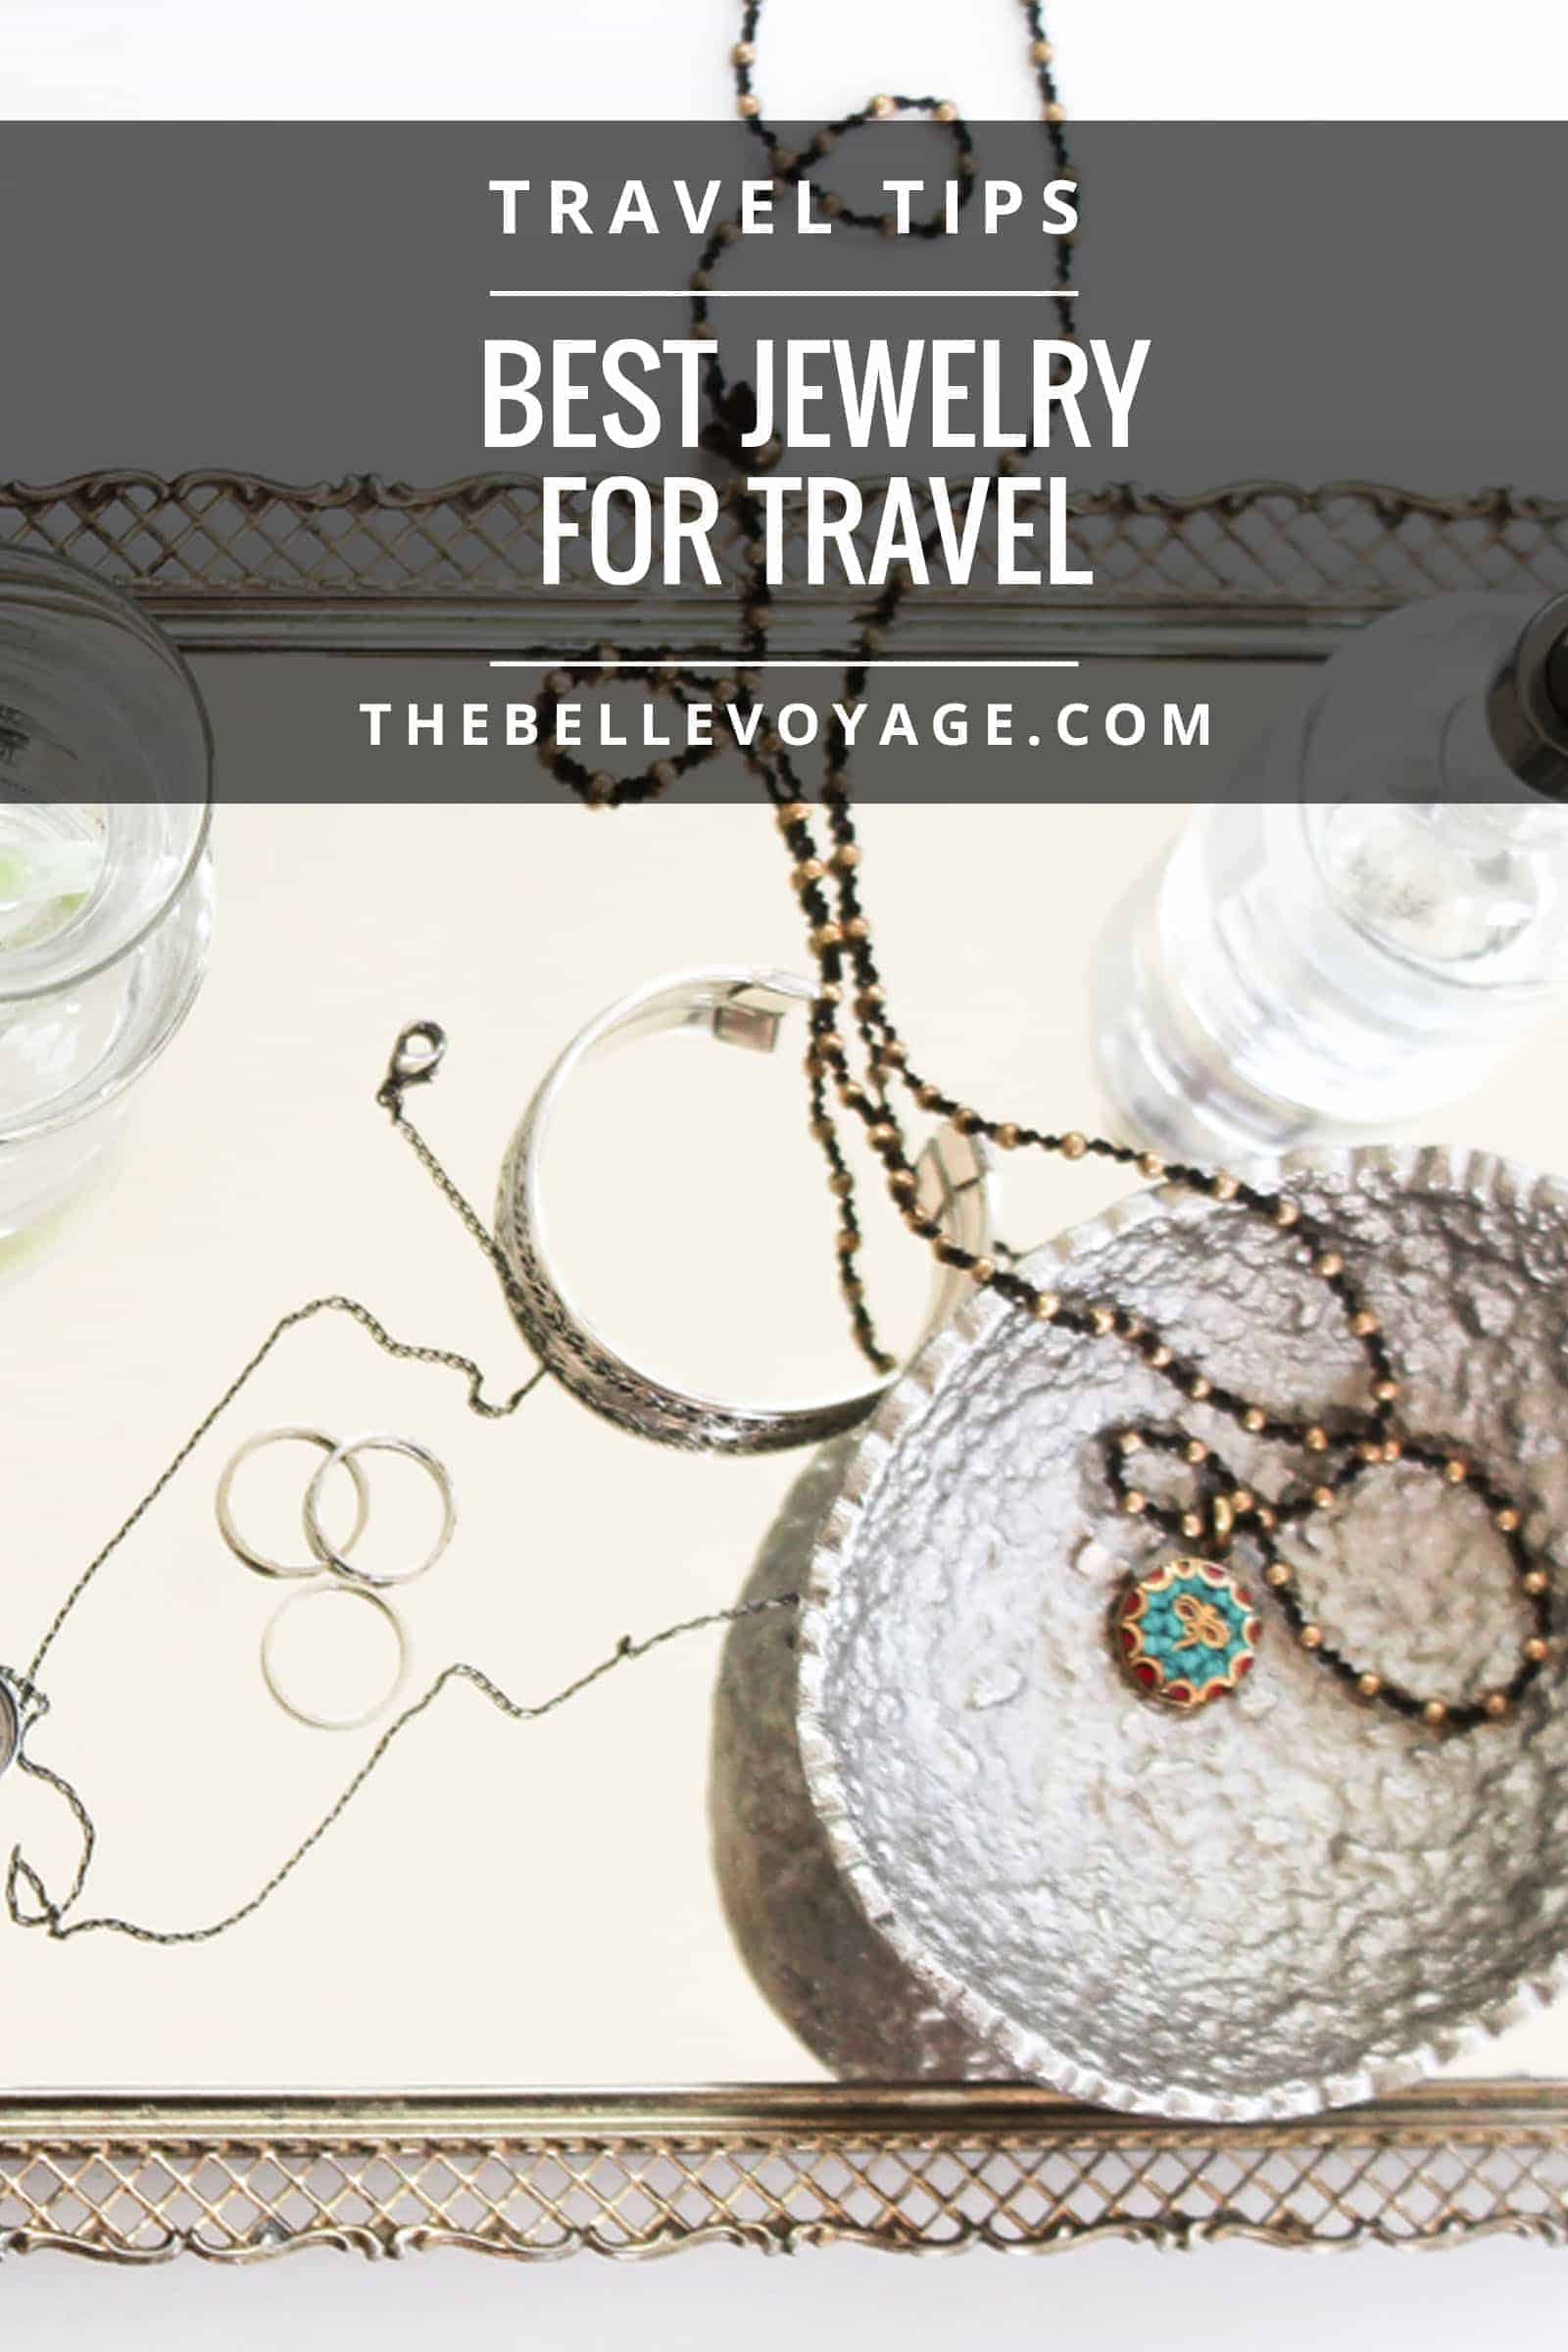 how to pack jewelry for travel